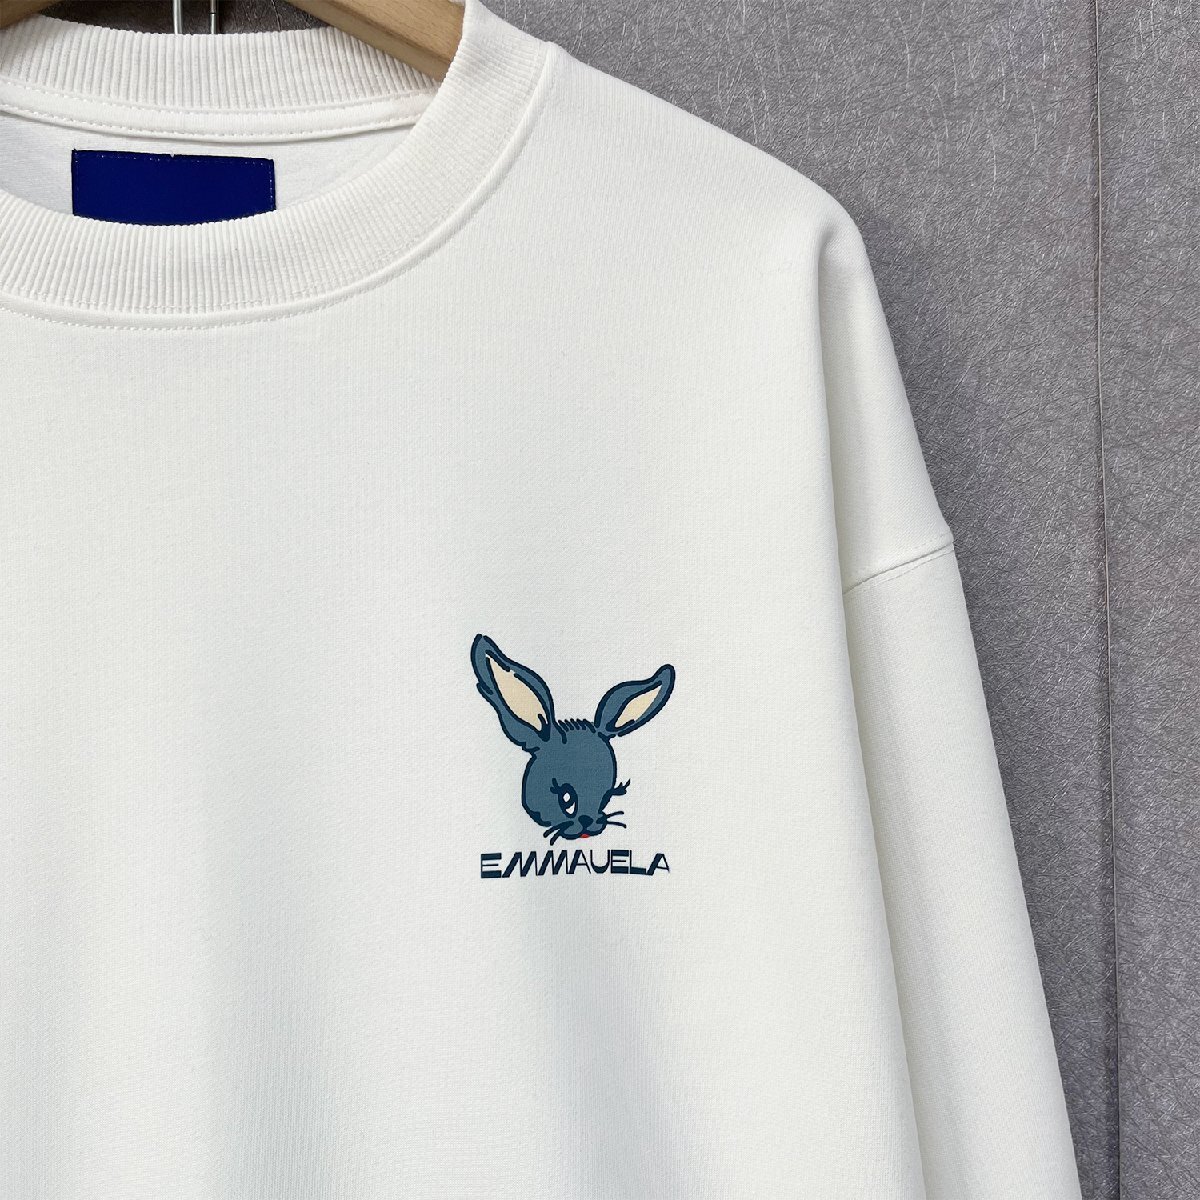  high class * sweatshirt regular price 4 ten thousand *Emmauela* Italy * milano departure * cotton 100% comfortable pull over rabbit pretty playing heart man and woman use M/46 size 